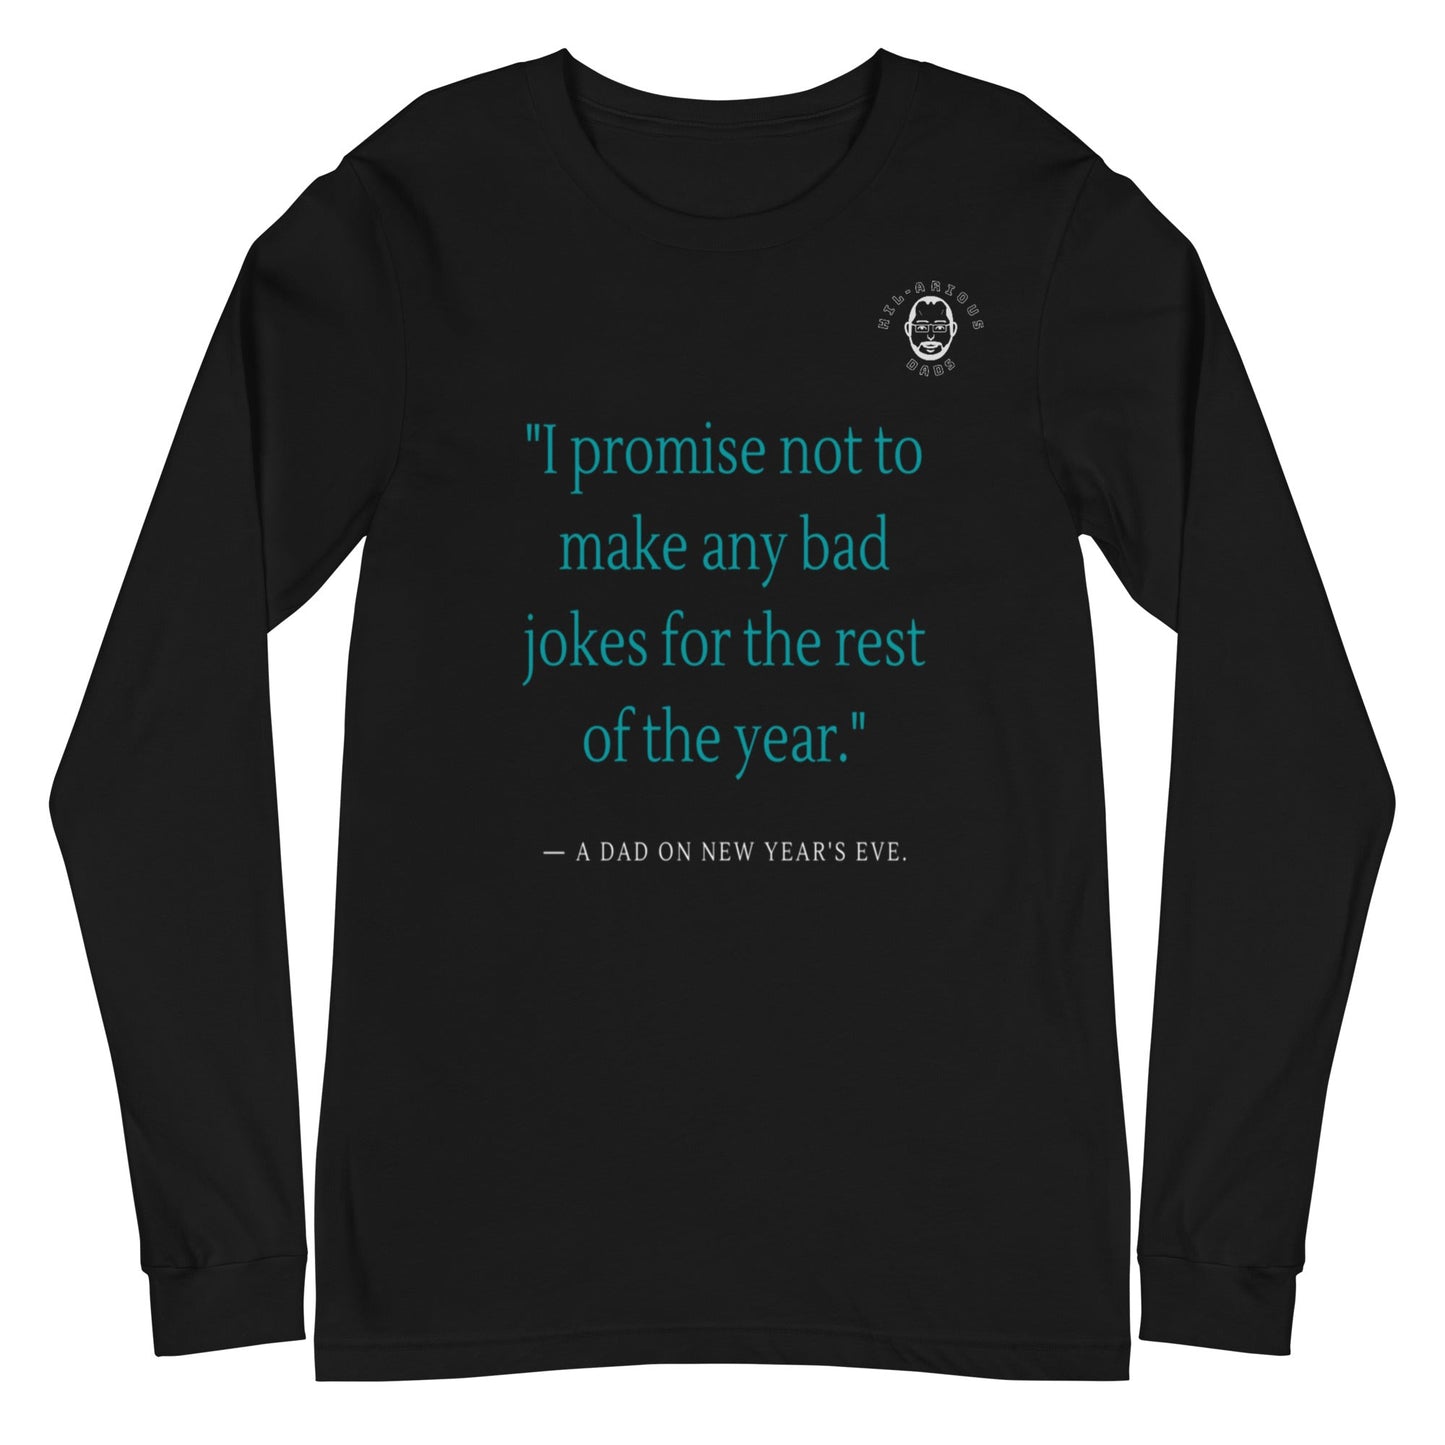 A dad's promise on New Year's Eve-Long Sleeve Tee - Hil-arious Dads